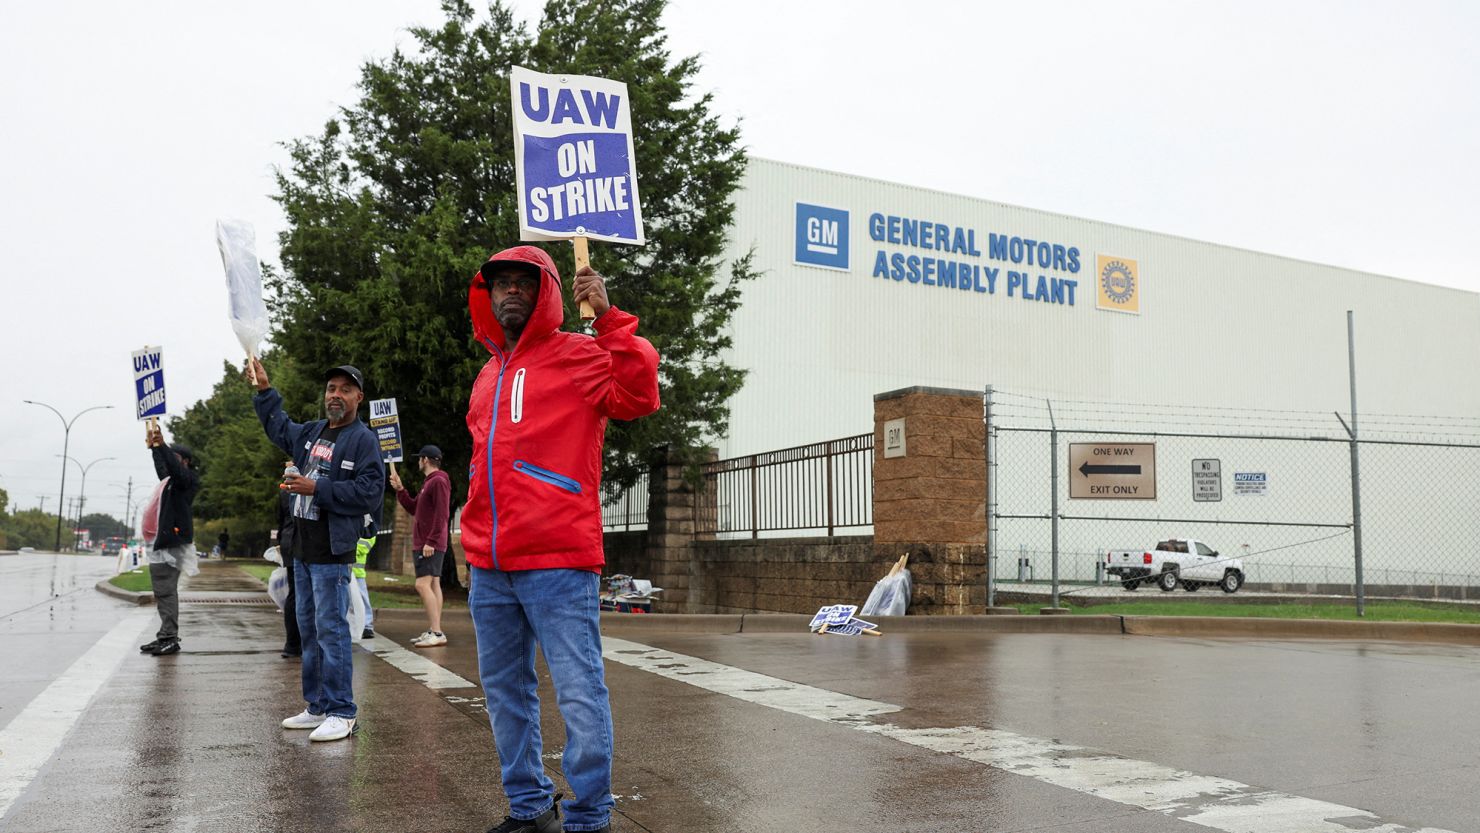 United Auto Workers members strike at a General Motors assembly last month. Rank-and-file membership have ratified the deal, ending the threat there could be a renewed strike.